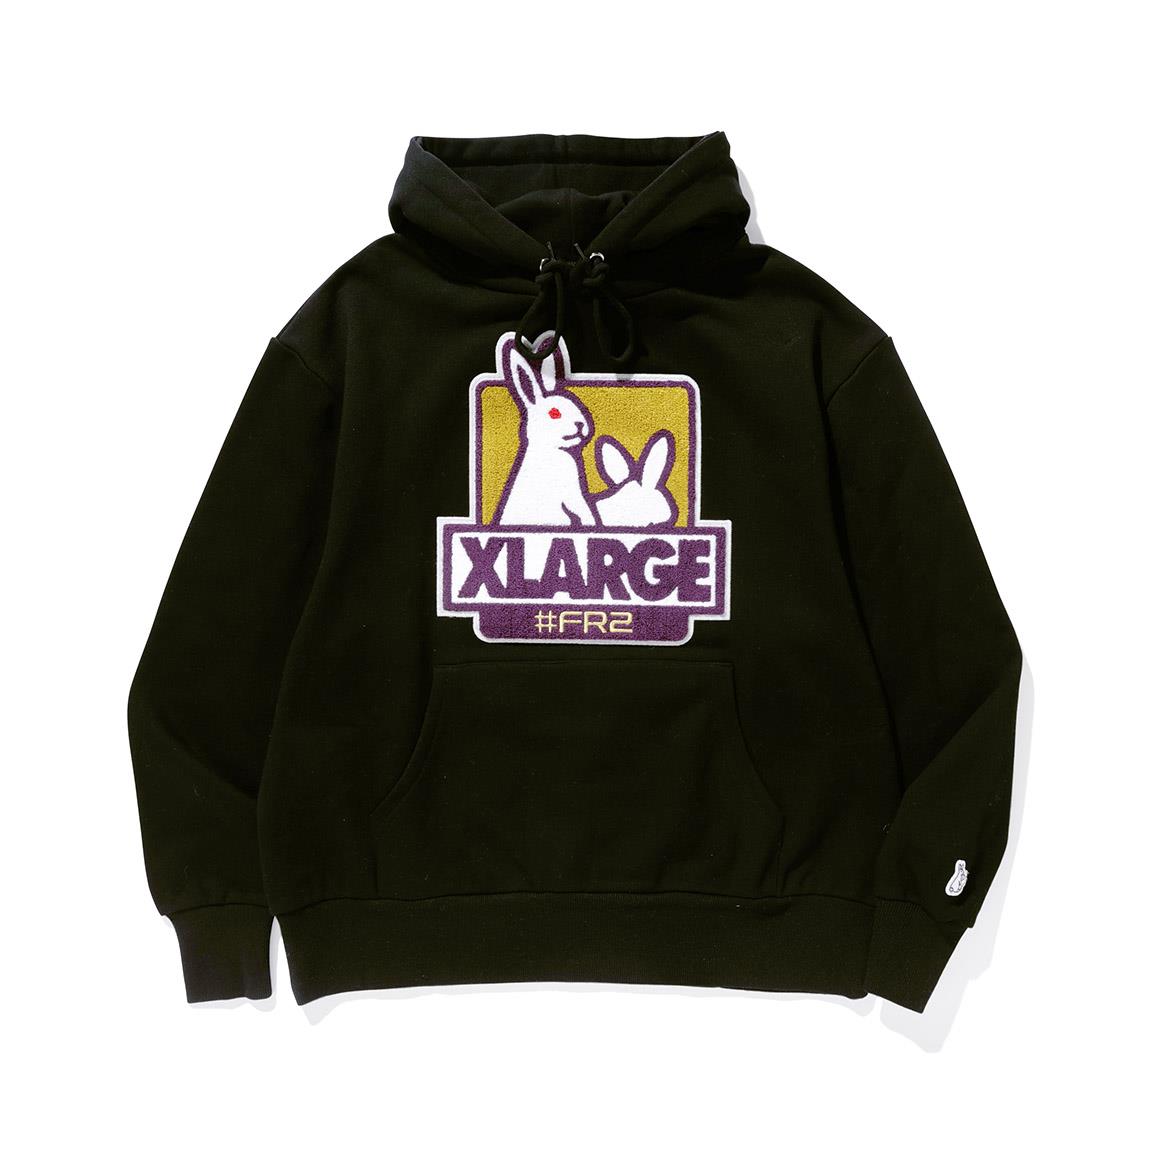 XLARGE collaboration with #FR2 セットアップパーカー